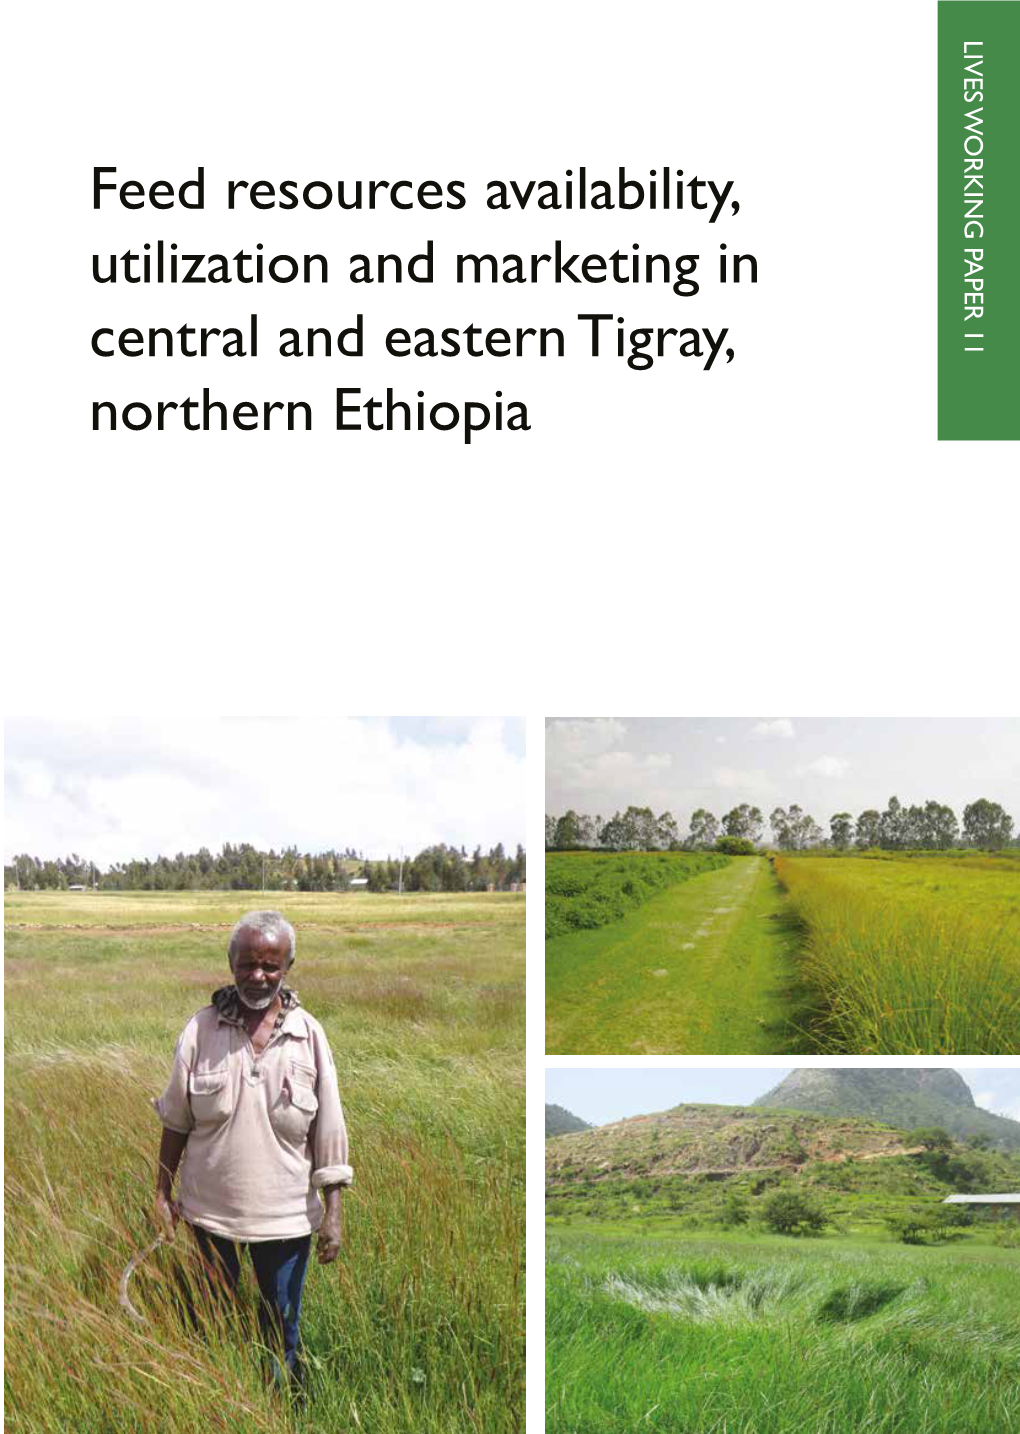 Feed Resources Availability, Utilization and Marketing in Central and Eastern Tigray, Northern Ethiopia